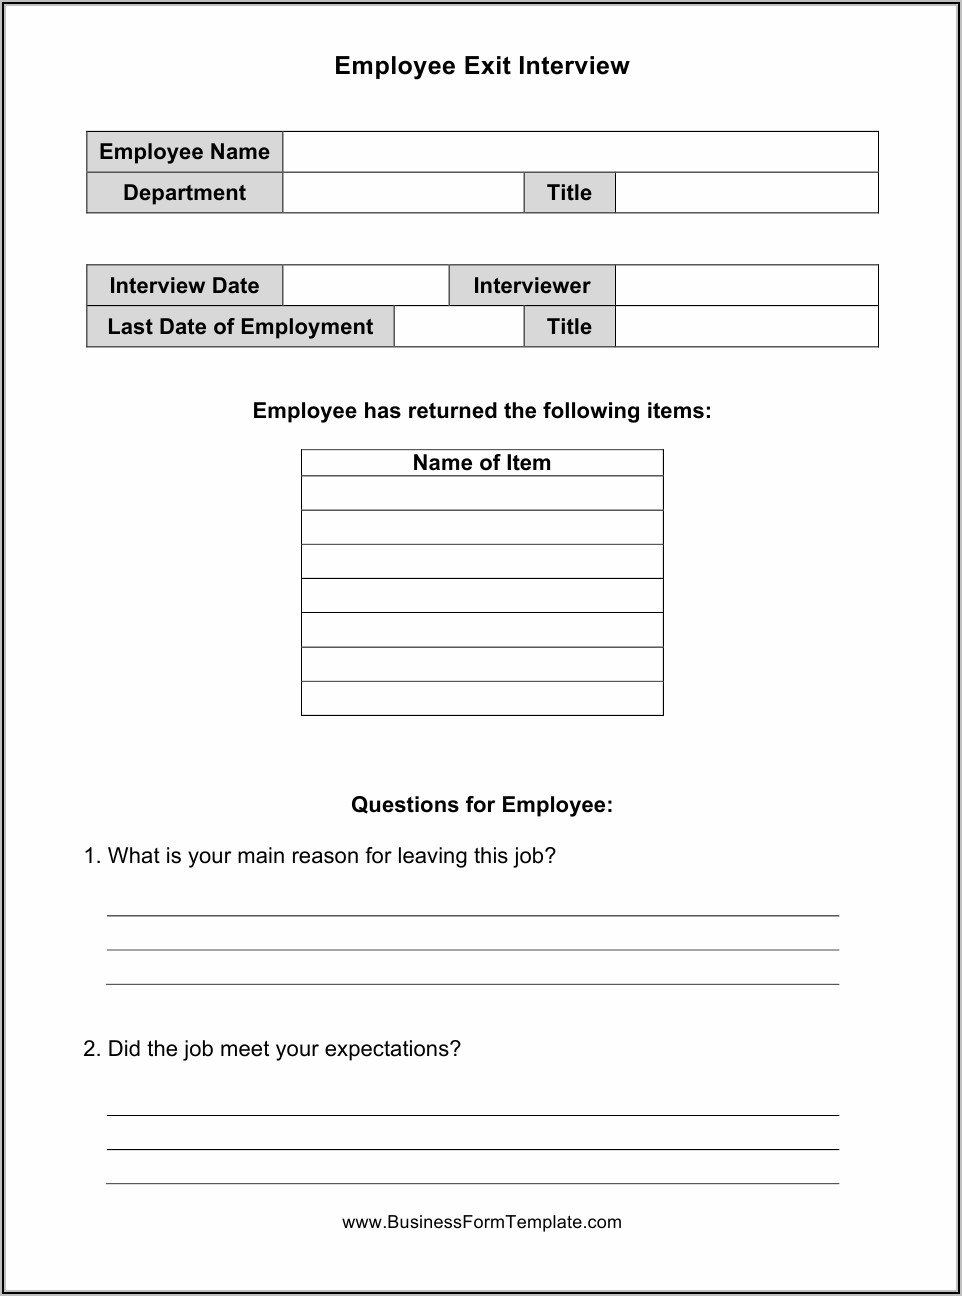 Employee Exit Interview Form Pdf